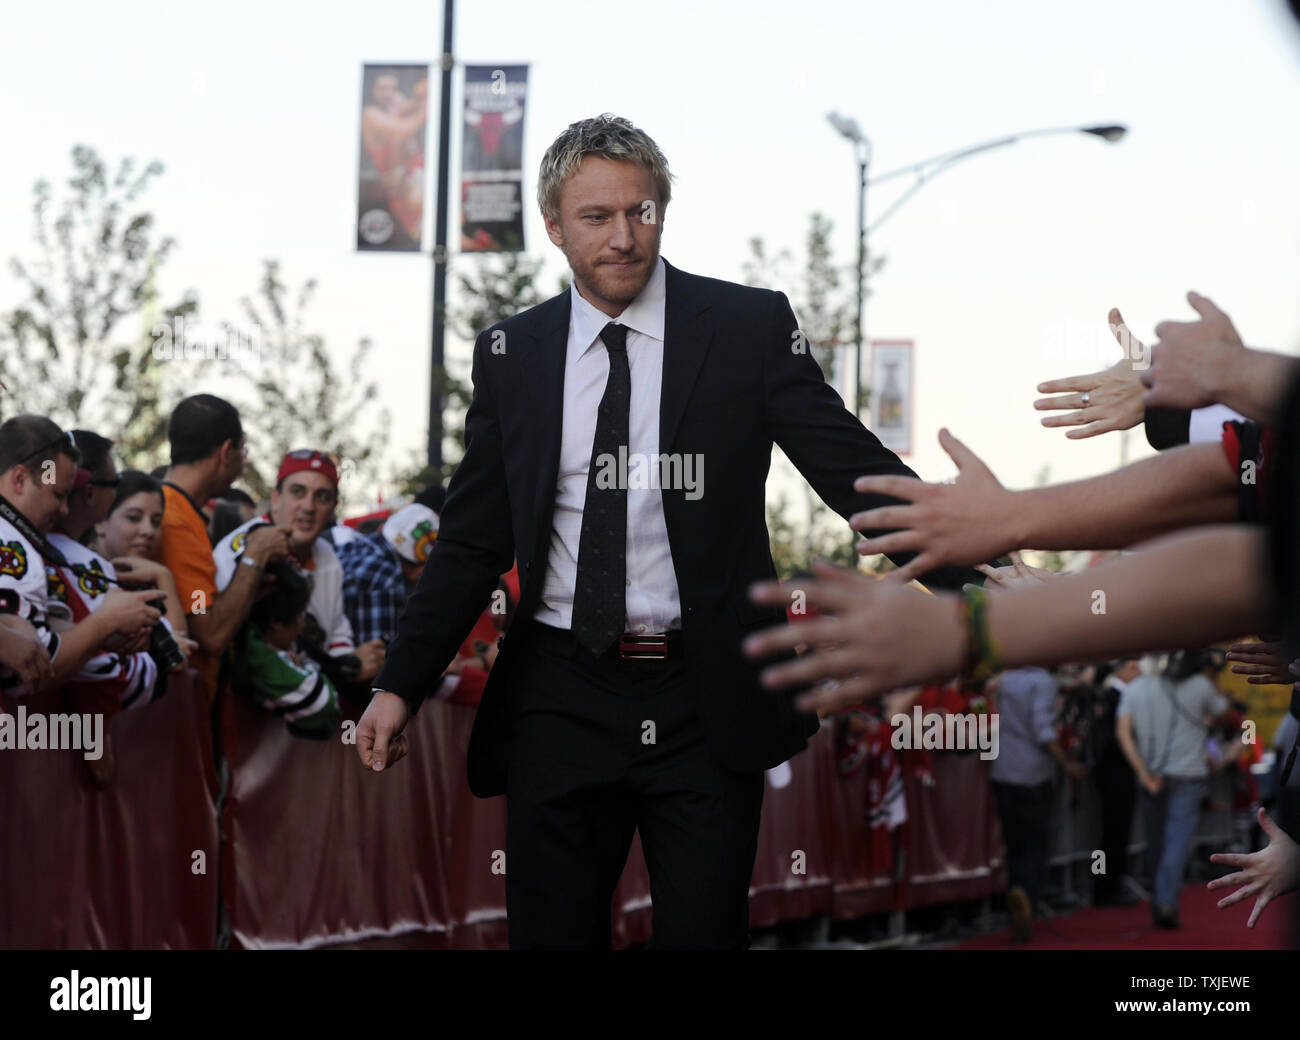 Chicago Blackhawks Marian Hossa walks the red carpet before the Hawks home opener against the Detroit Red Wings at the United Center in Chicago on October 9, 2010 in Chicago.     UPI/David Banks Stock Photo